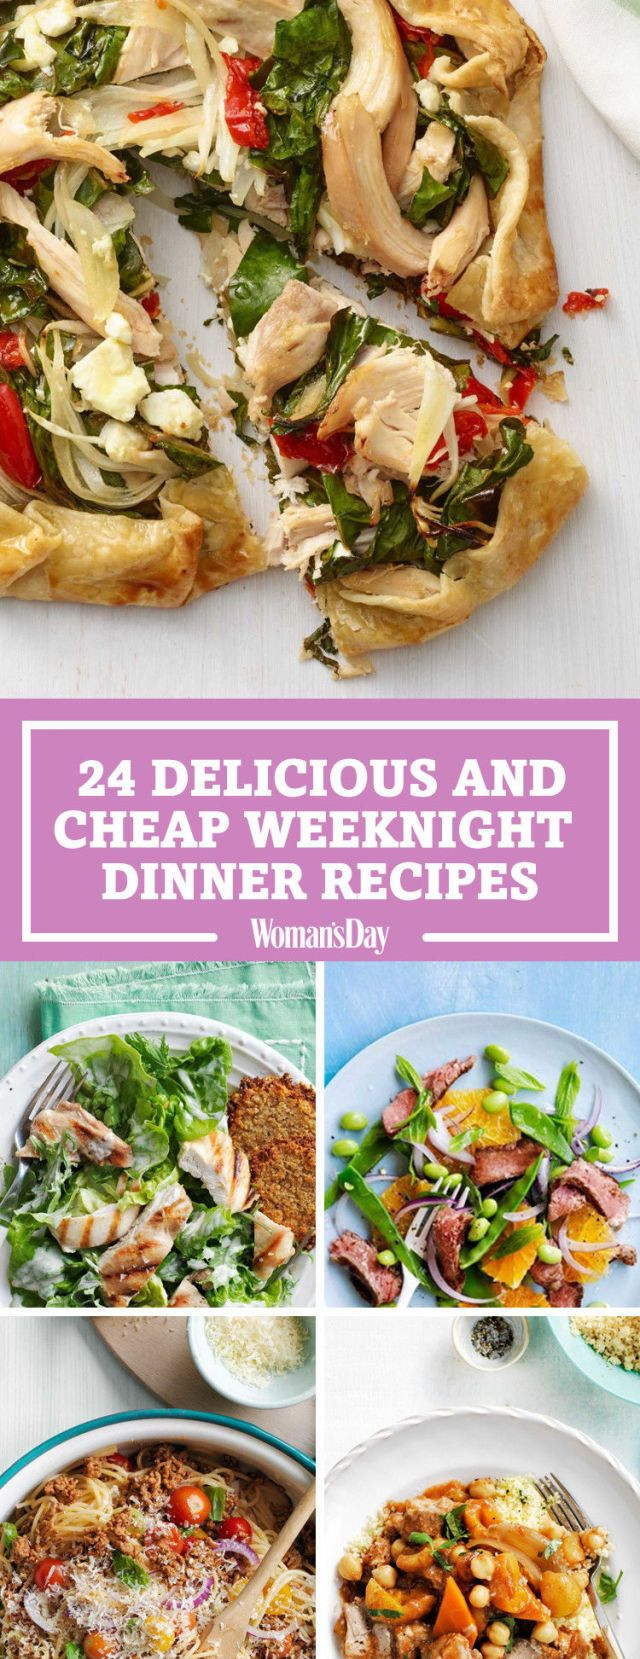 Cheap And Easy Dinner Ideas
 100 Cheap Dinner Ideas – Easy Recipes for Inexpensive Meals